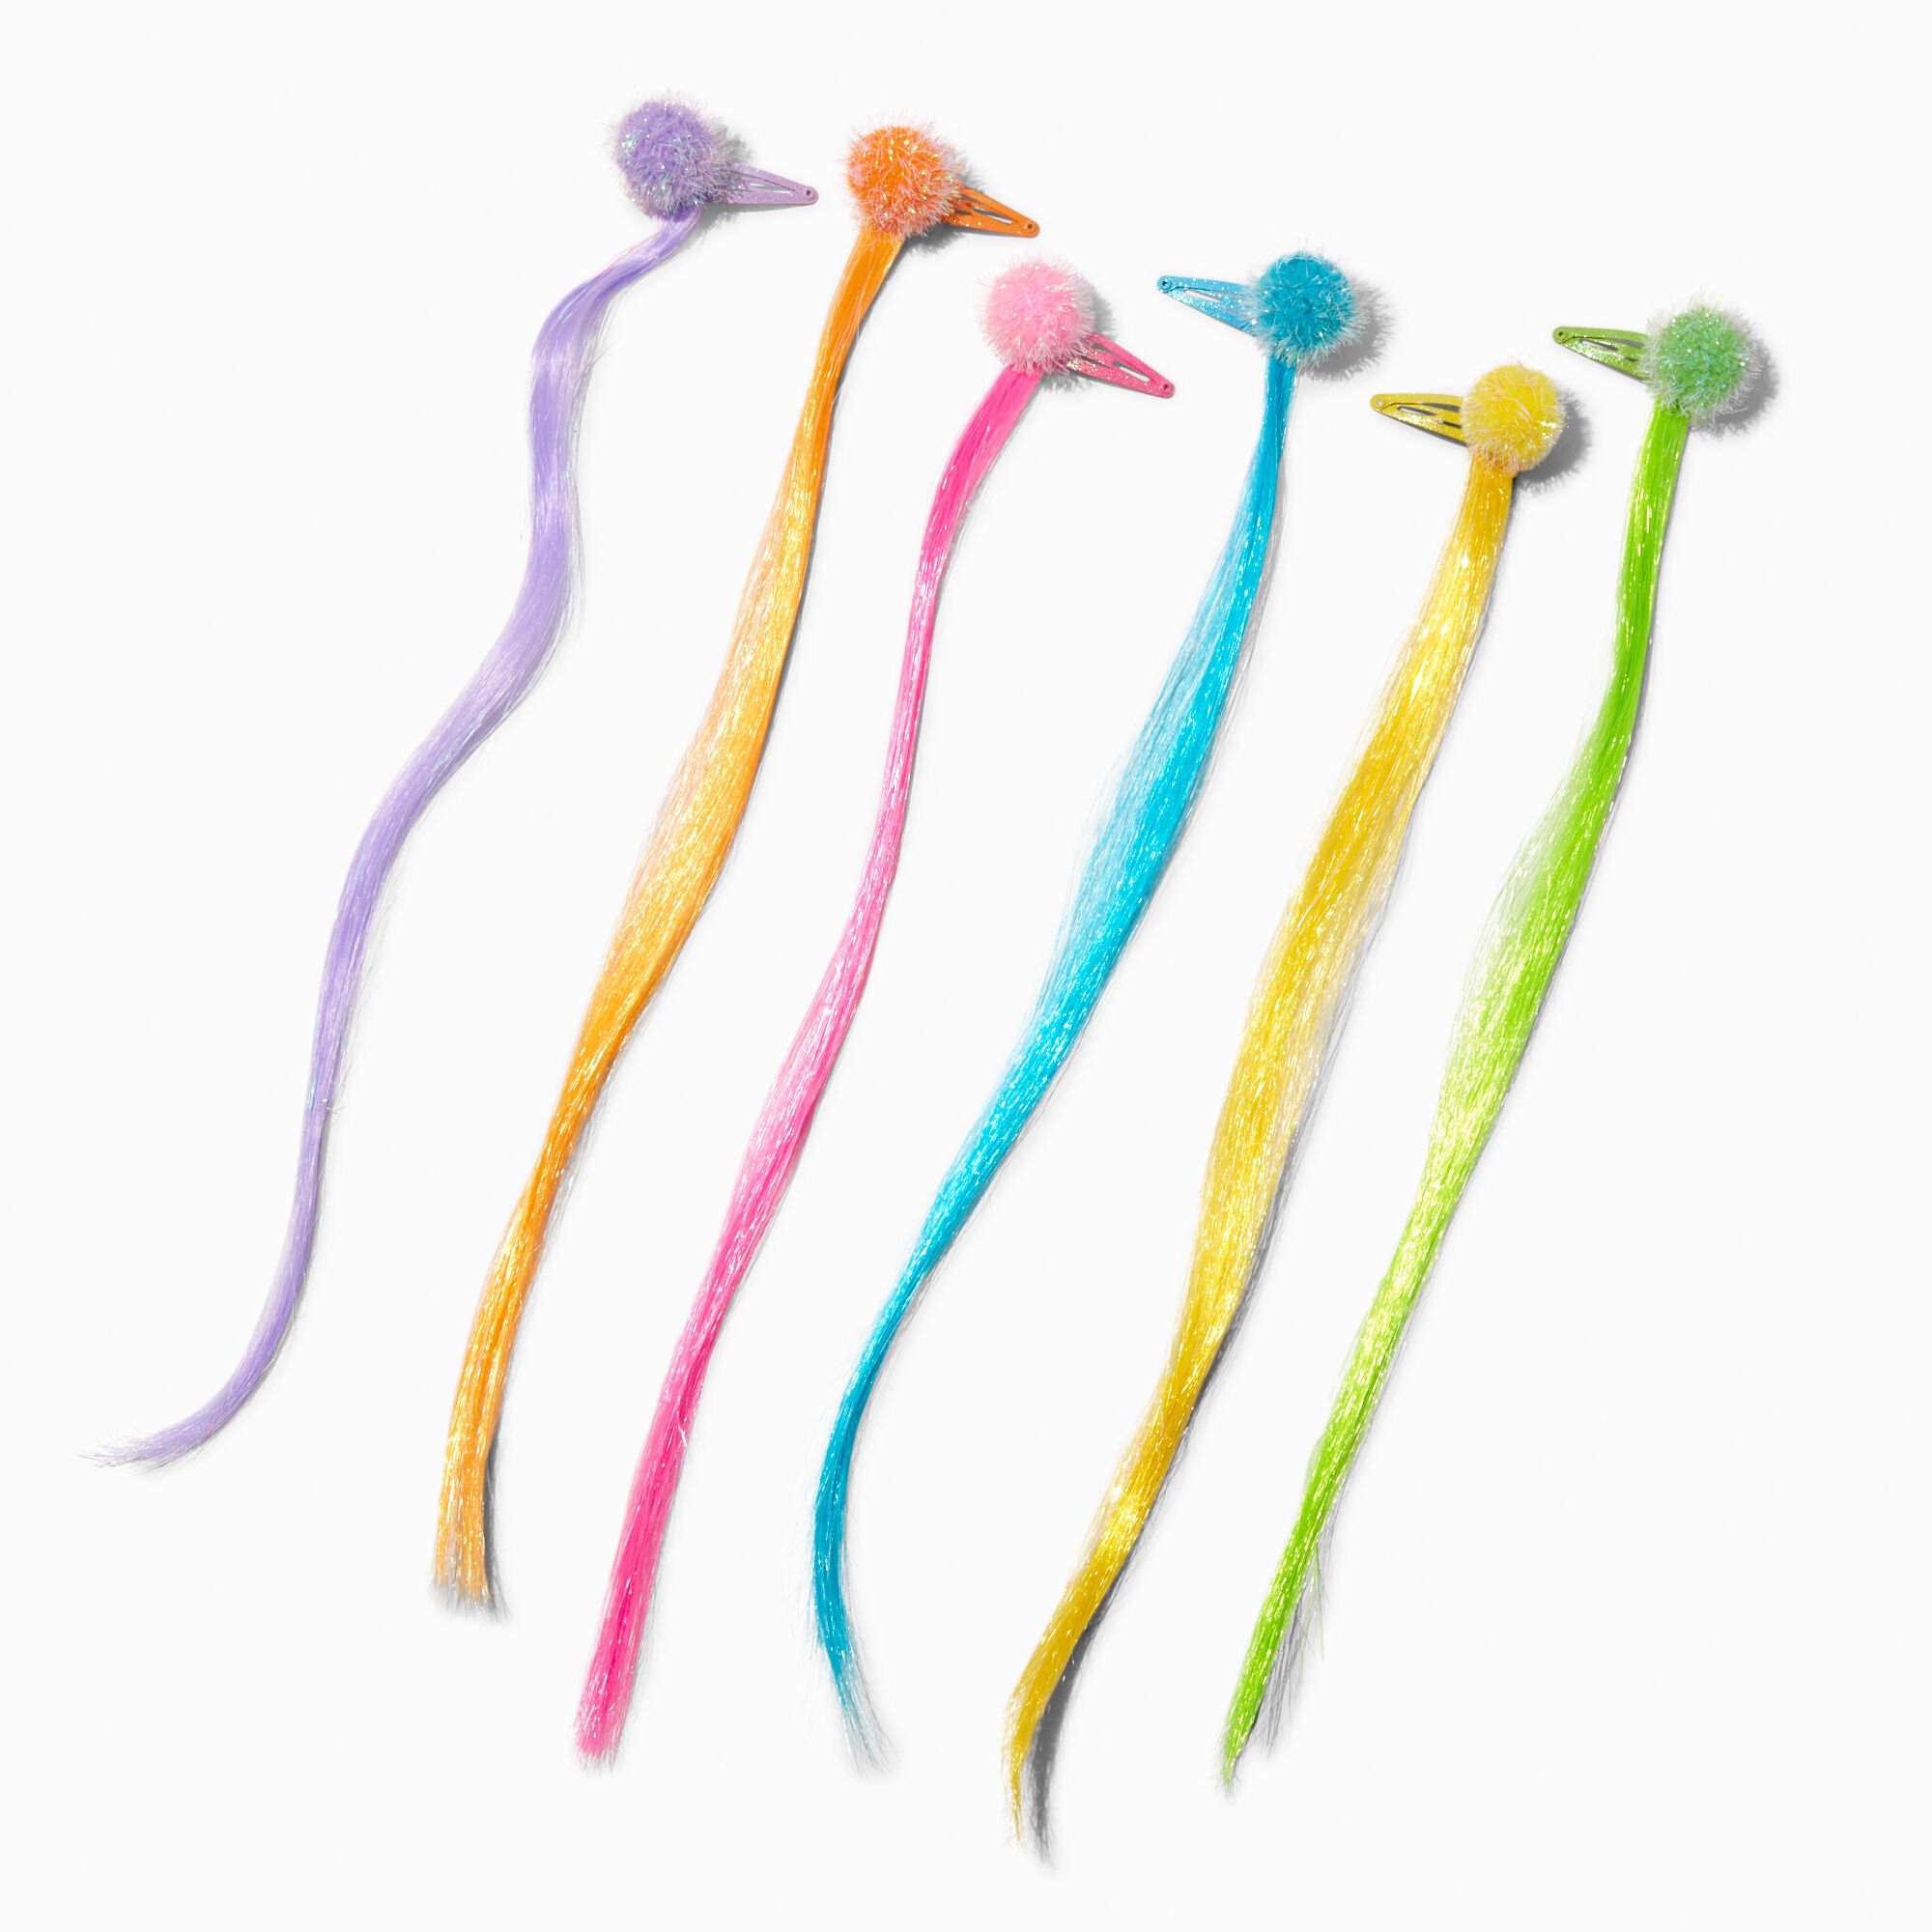 View Claires Bright Pom Faux Hair Snap Clips 6 Pack information